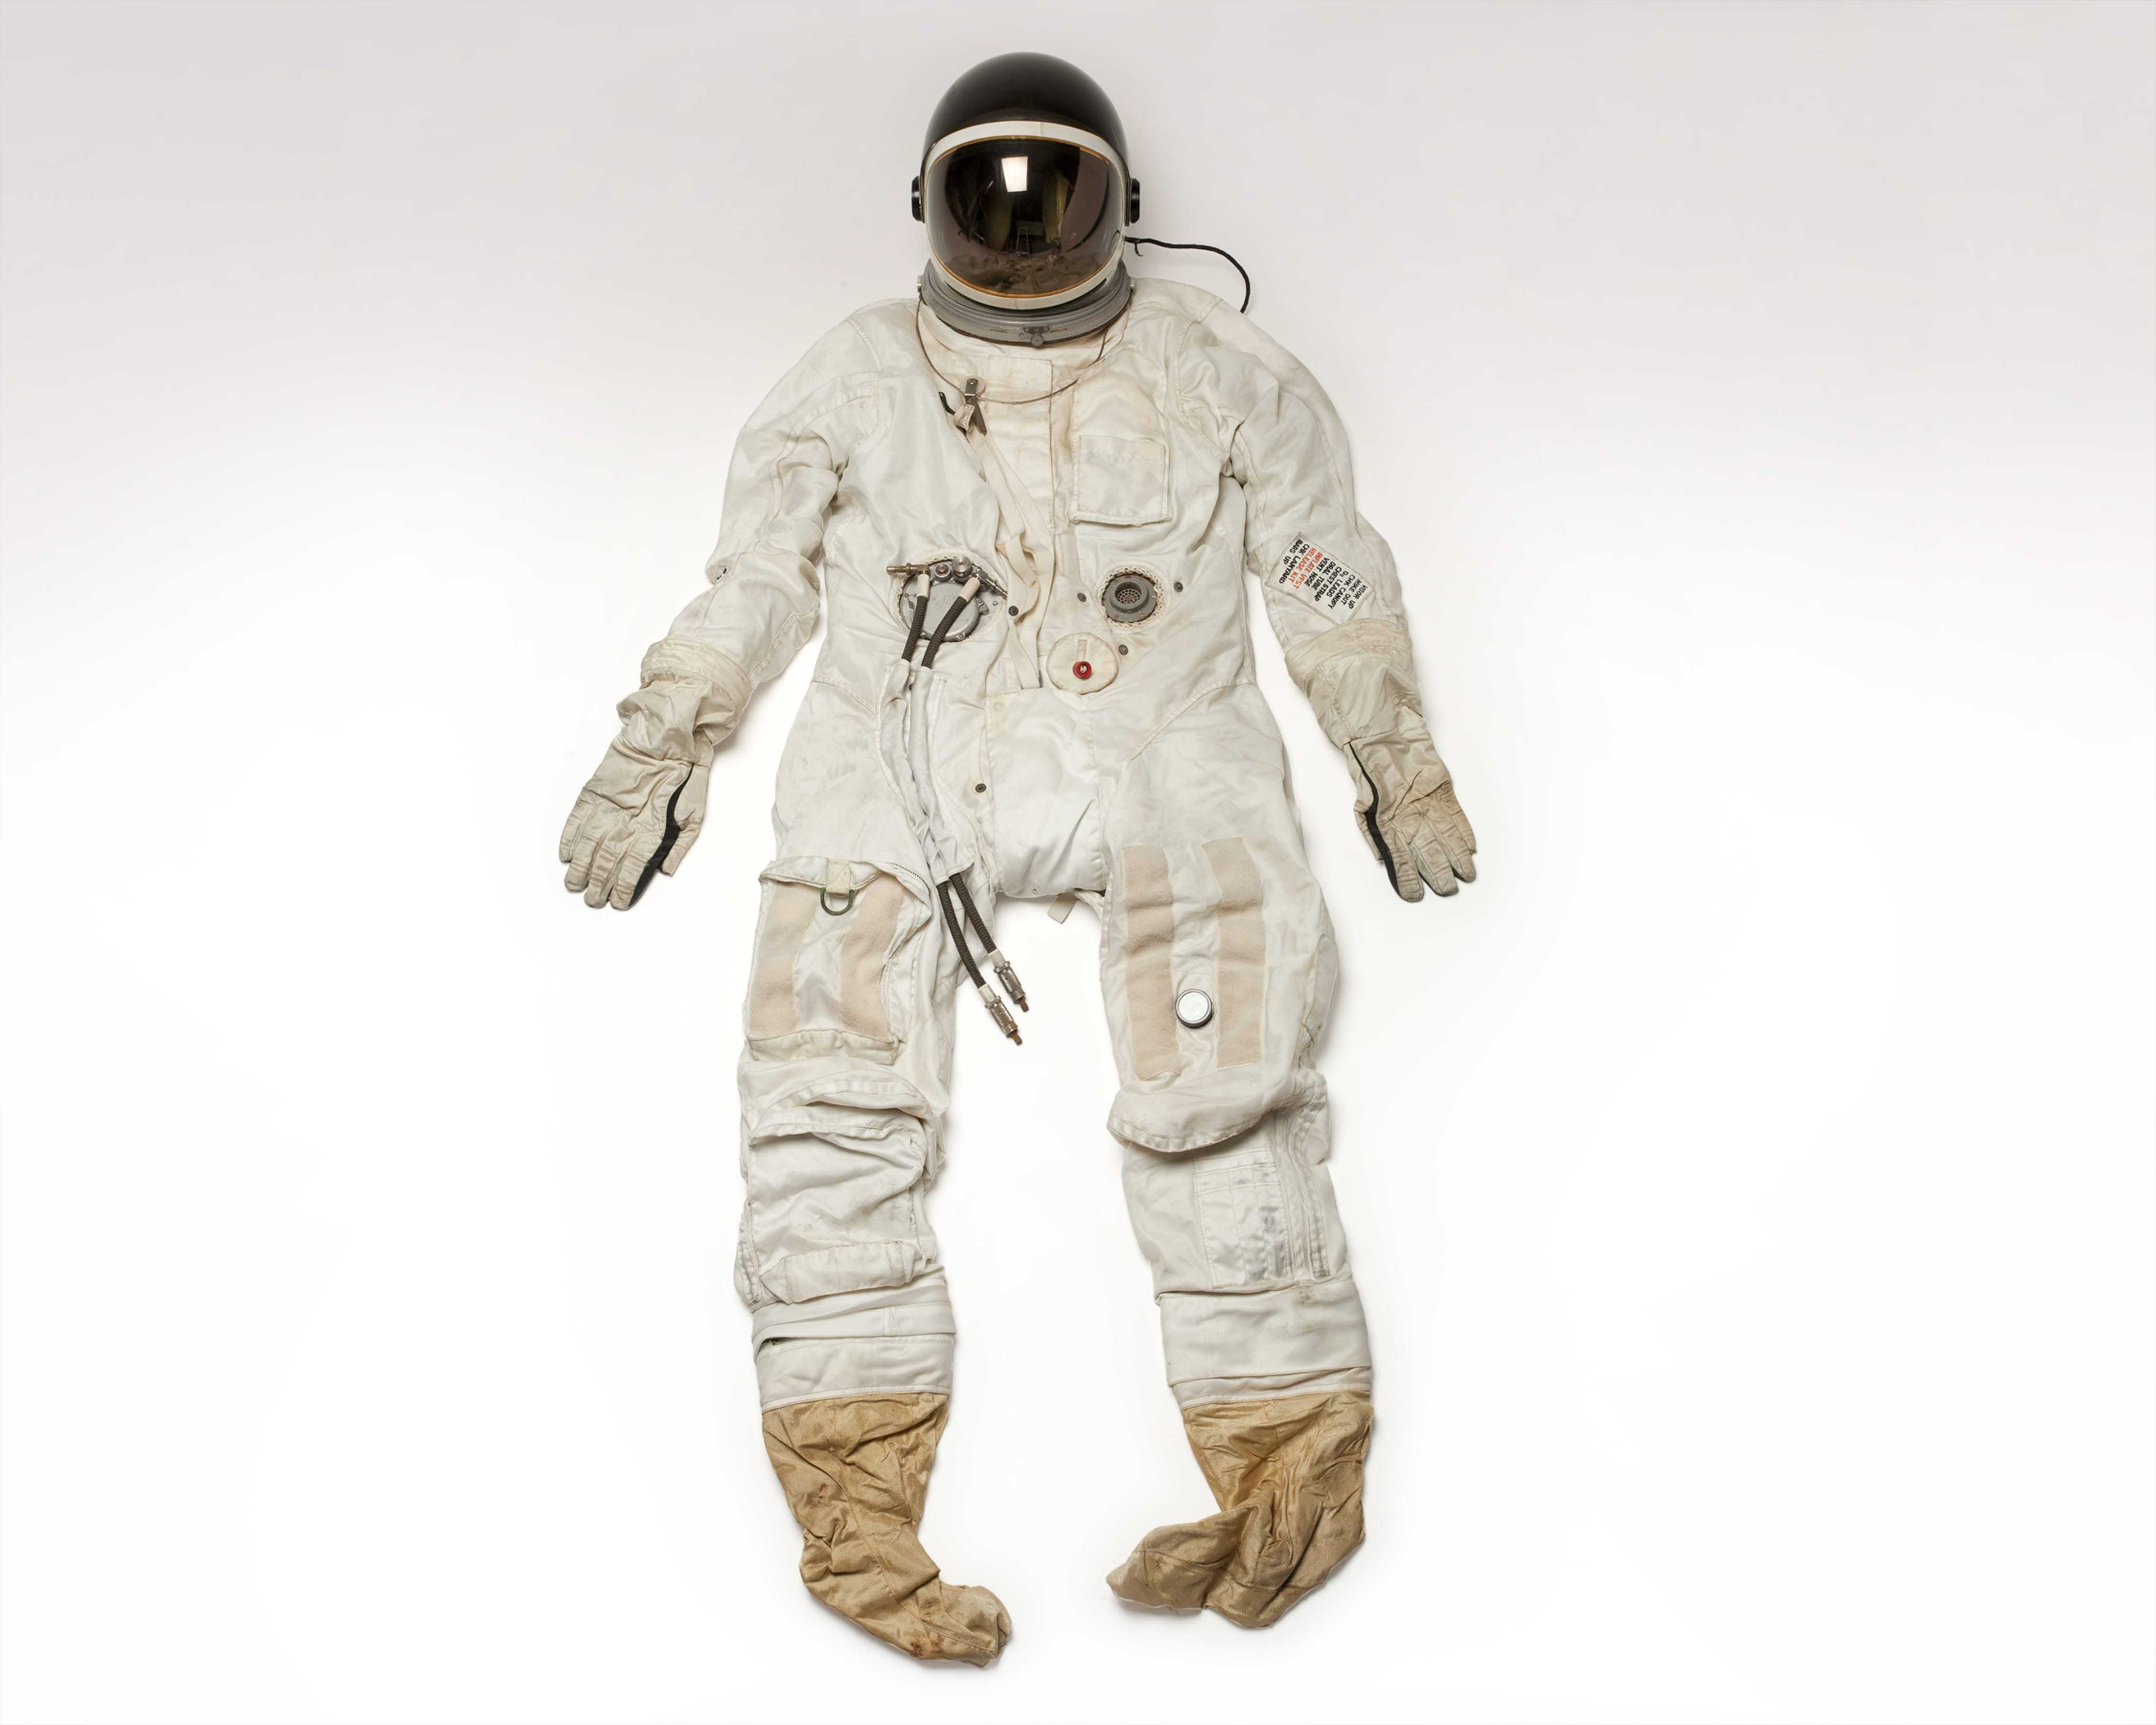 A white pressure suit in a standing position with yellow boots and a black helmet